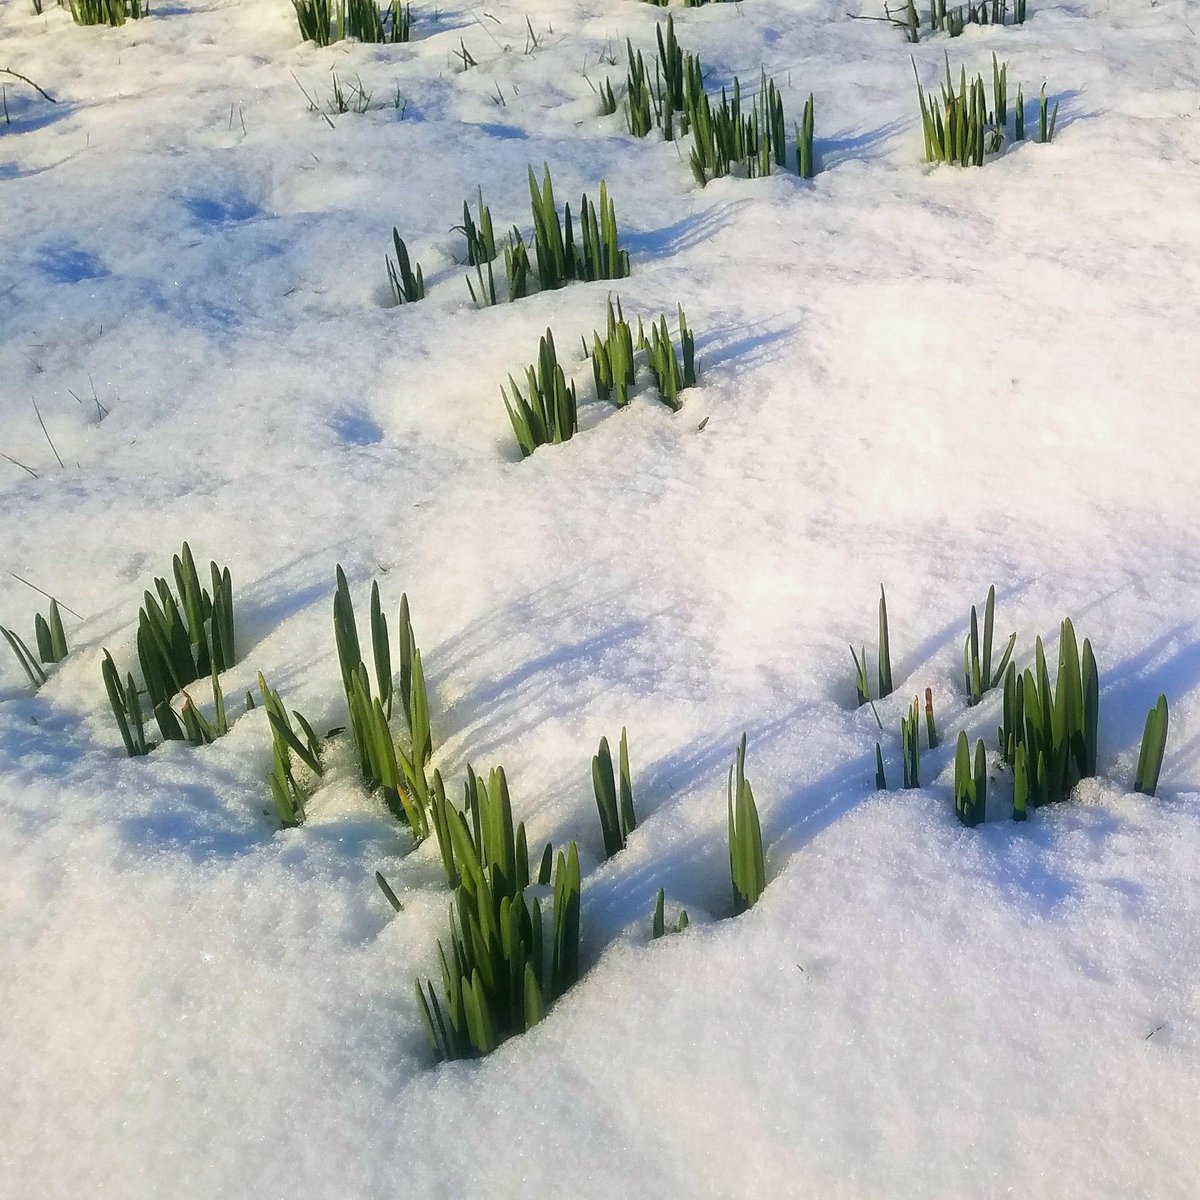 A gentle reminder that even though there is still snow on the ground here in Glasgow, if you look closely you can see there is also a hint of Spring in the air.

#glasgow #snow #greenshoots #daffodils #spring #winter #springshoot #springshoots